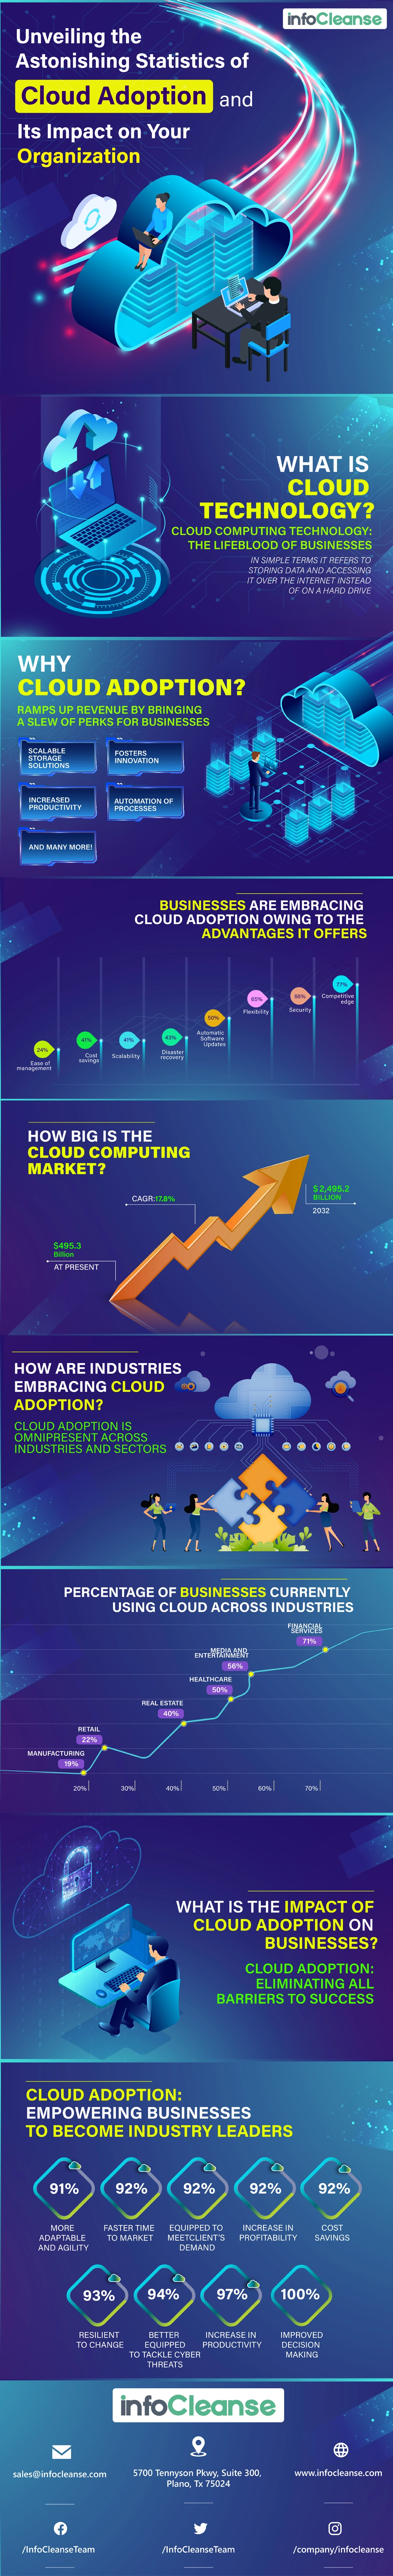 Unveiling the Astonishing Statistics of Cloud Adoption and Its Impact on Your Organization-Infographic-Design